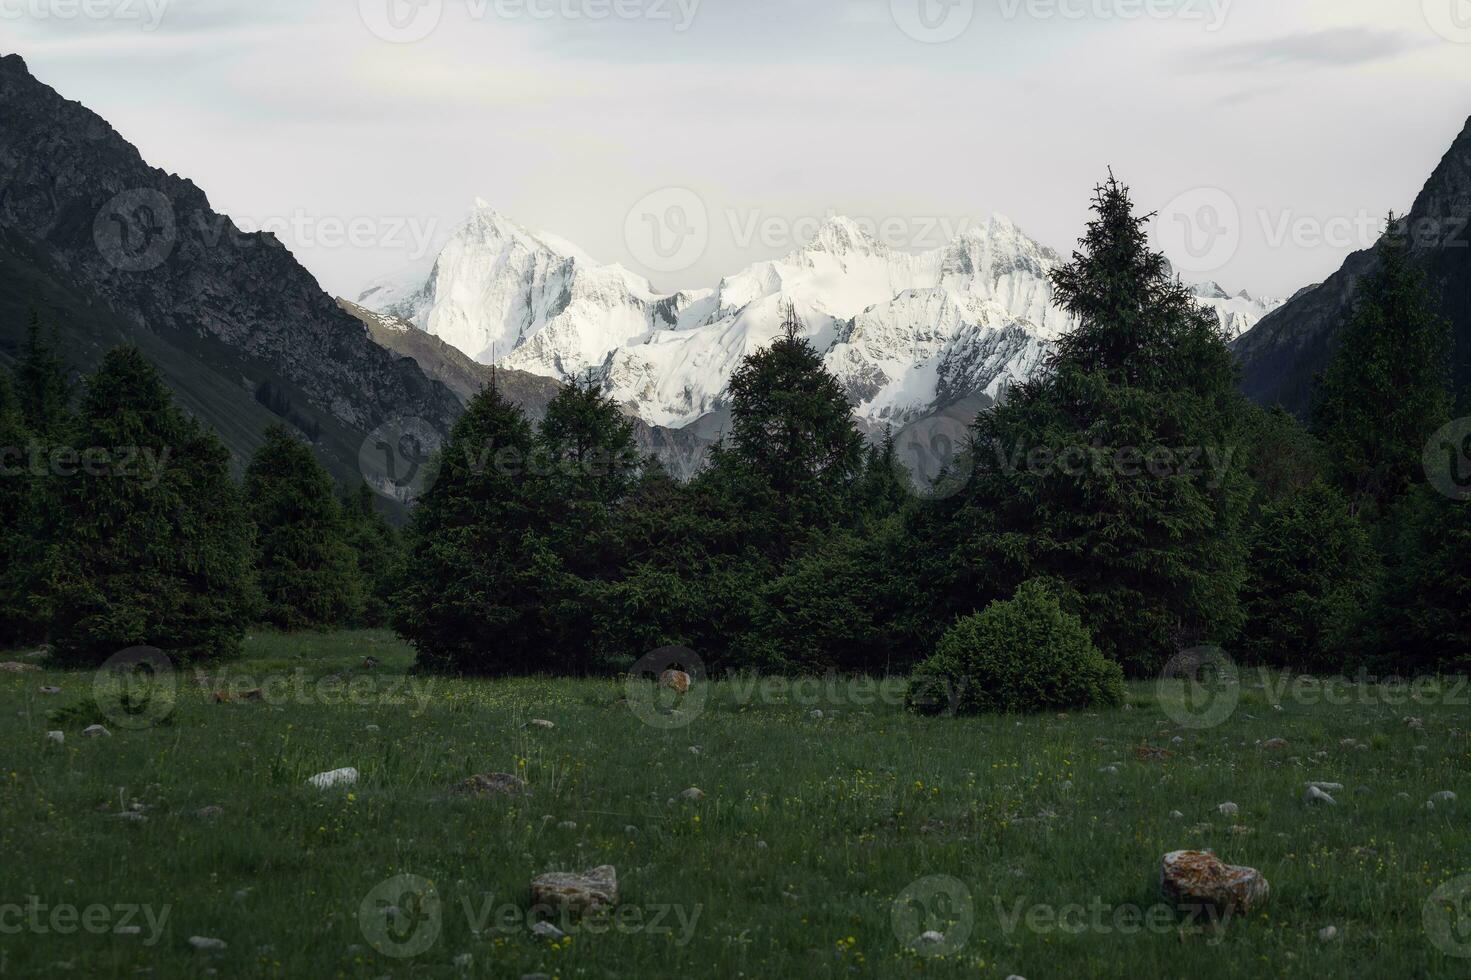 Snowy mountains and trees in a cloudy day. Khan Tengri Mountain In Xinjiang, China. photo